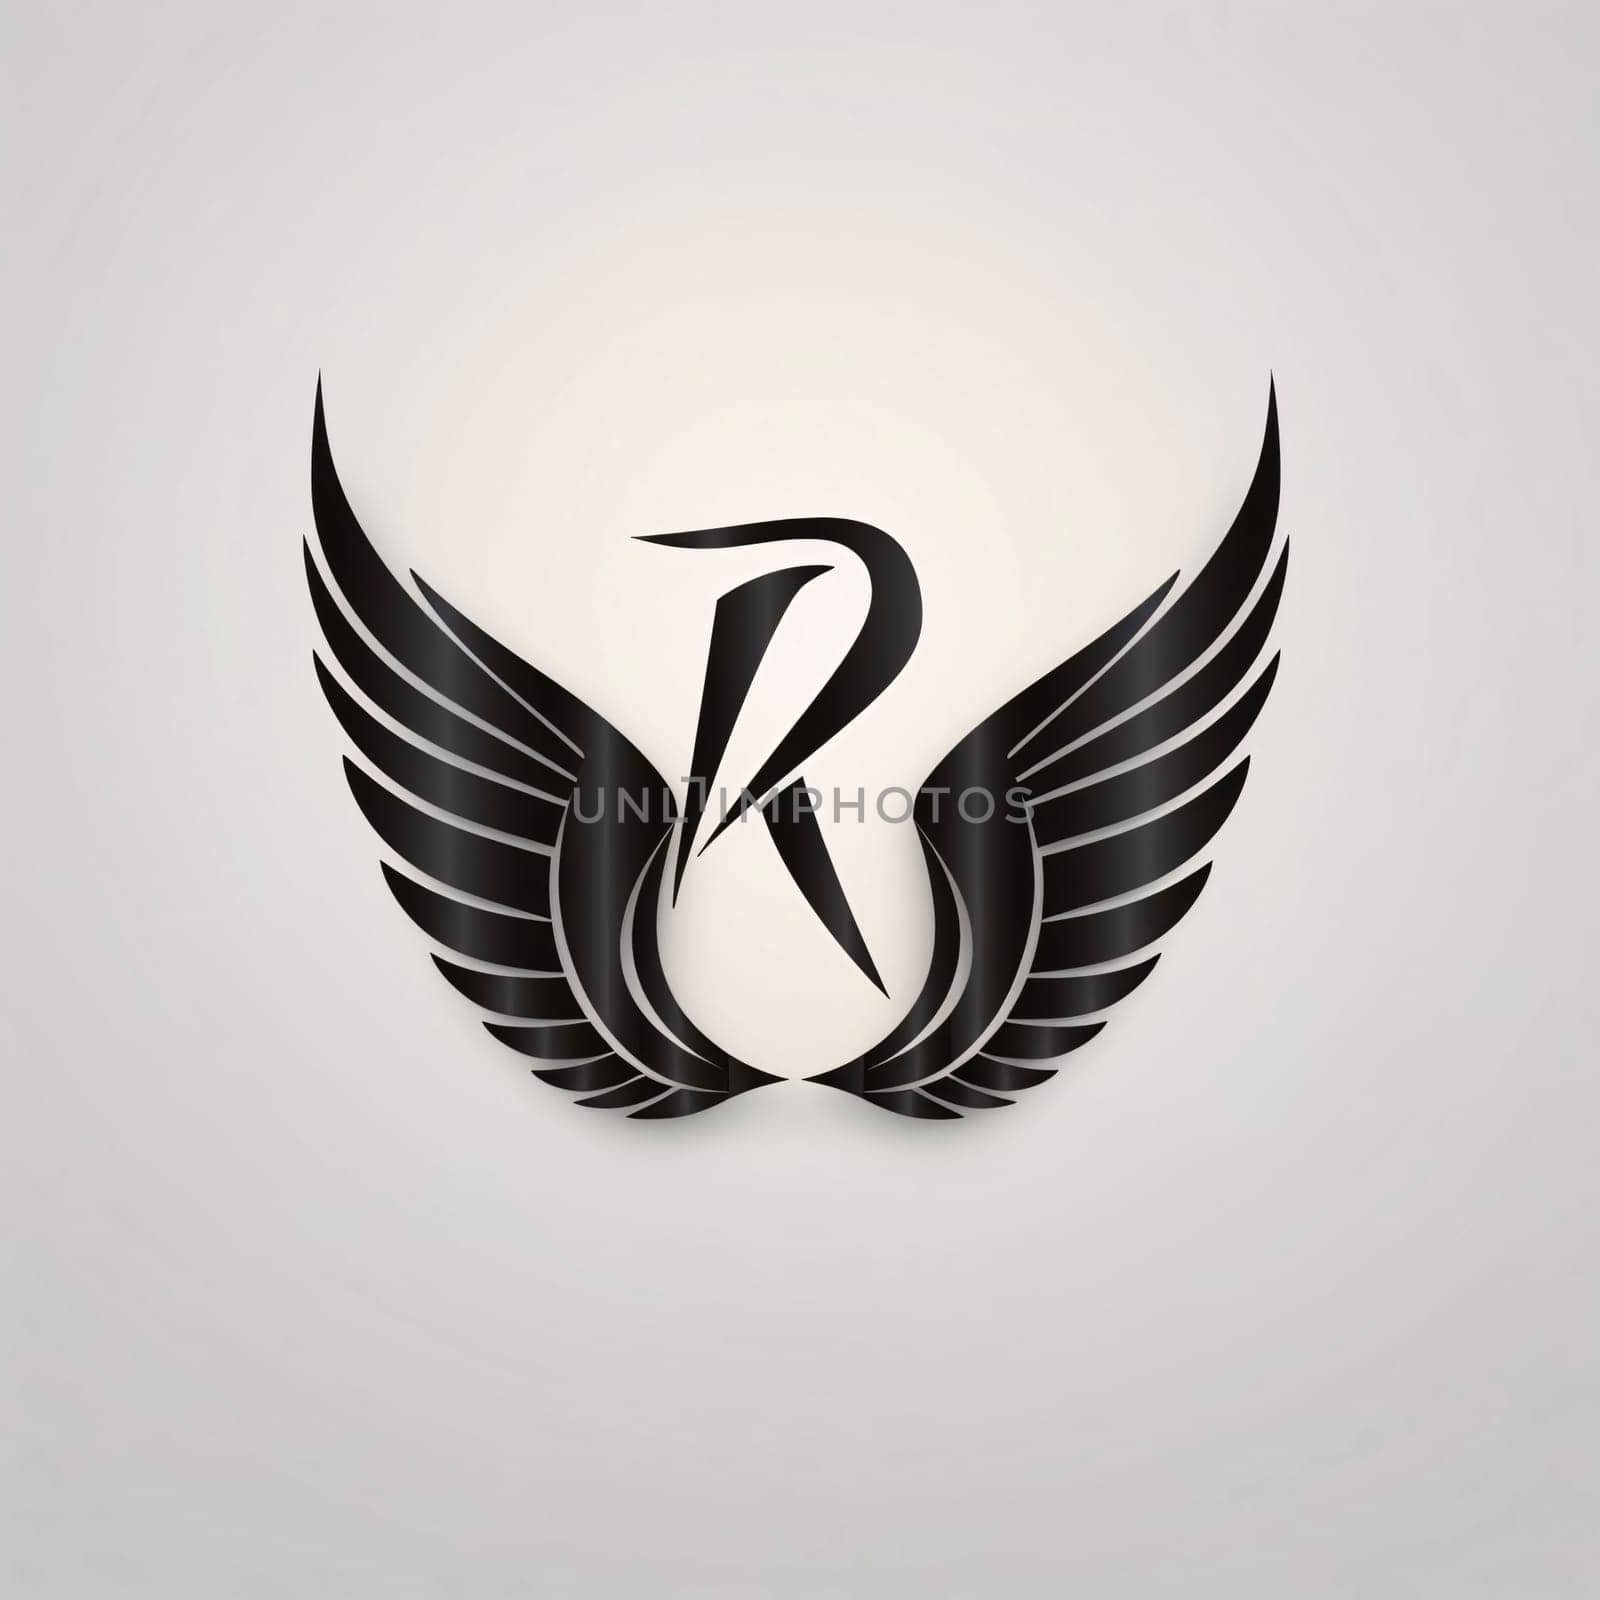 Letter R logo with black wings. Design template elements for your application or corporate identity. by ThemesS